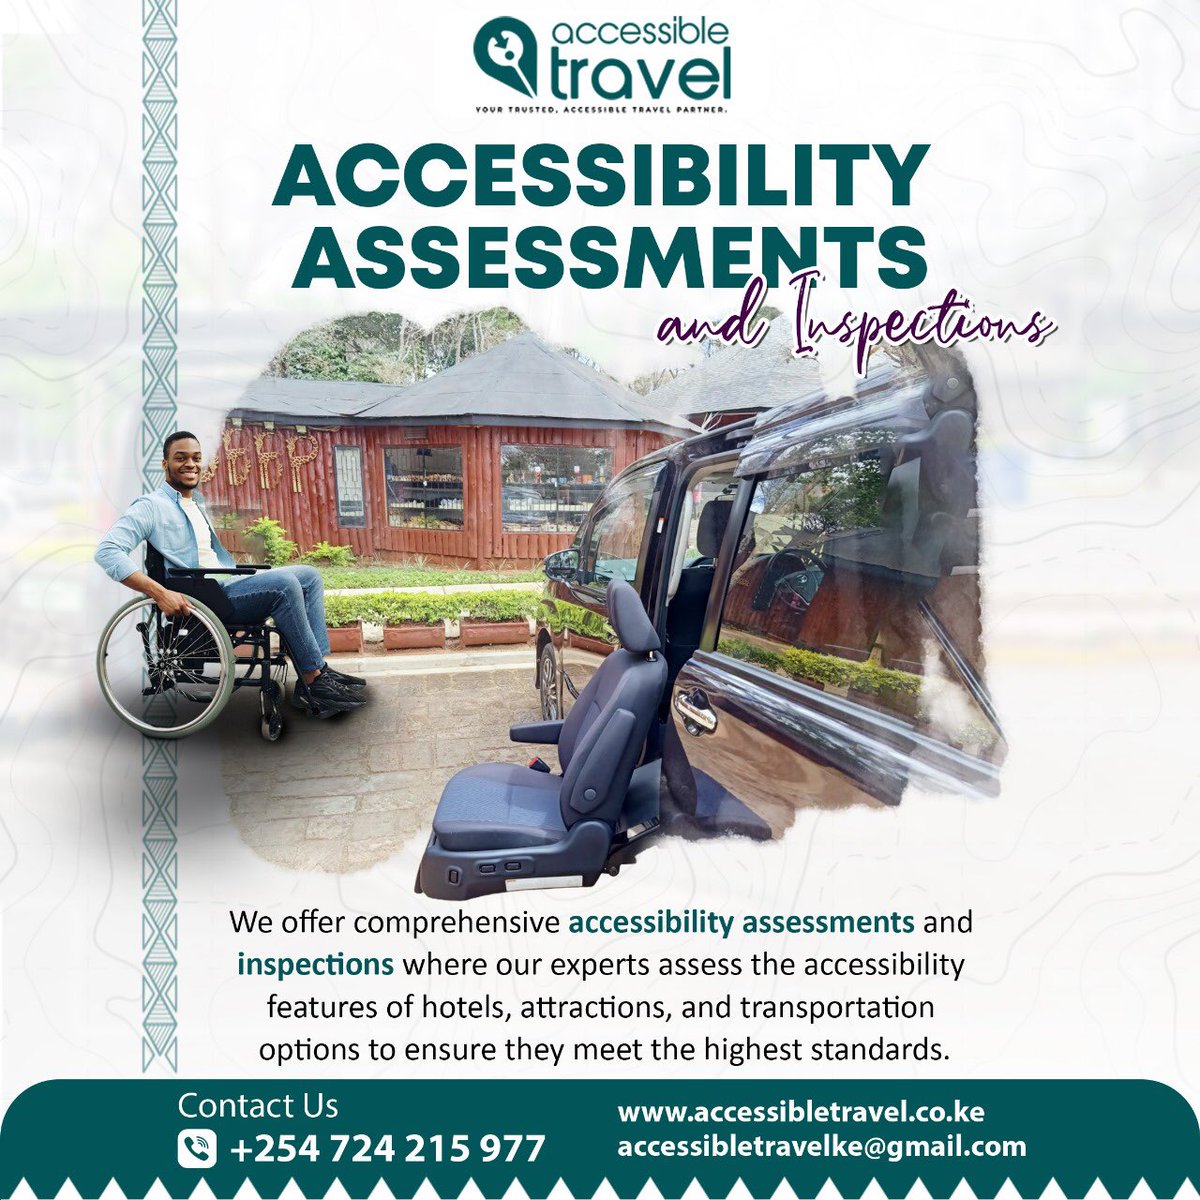 We advocate for facilities that are easily accessible for employees and clients by ensuring workplace parking areas, entrances and shared spaces are accessible to staff and clients with disabilities.